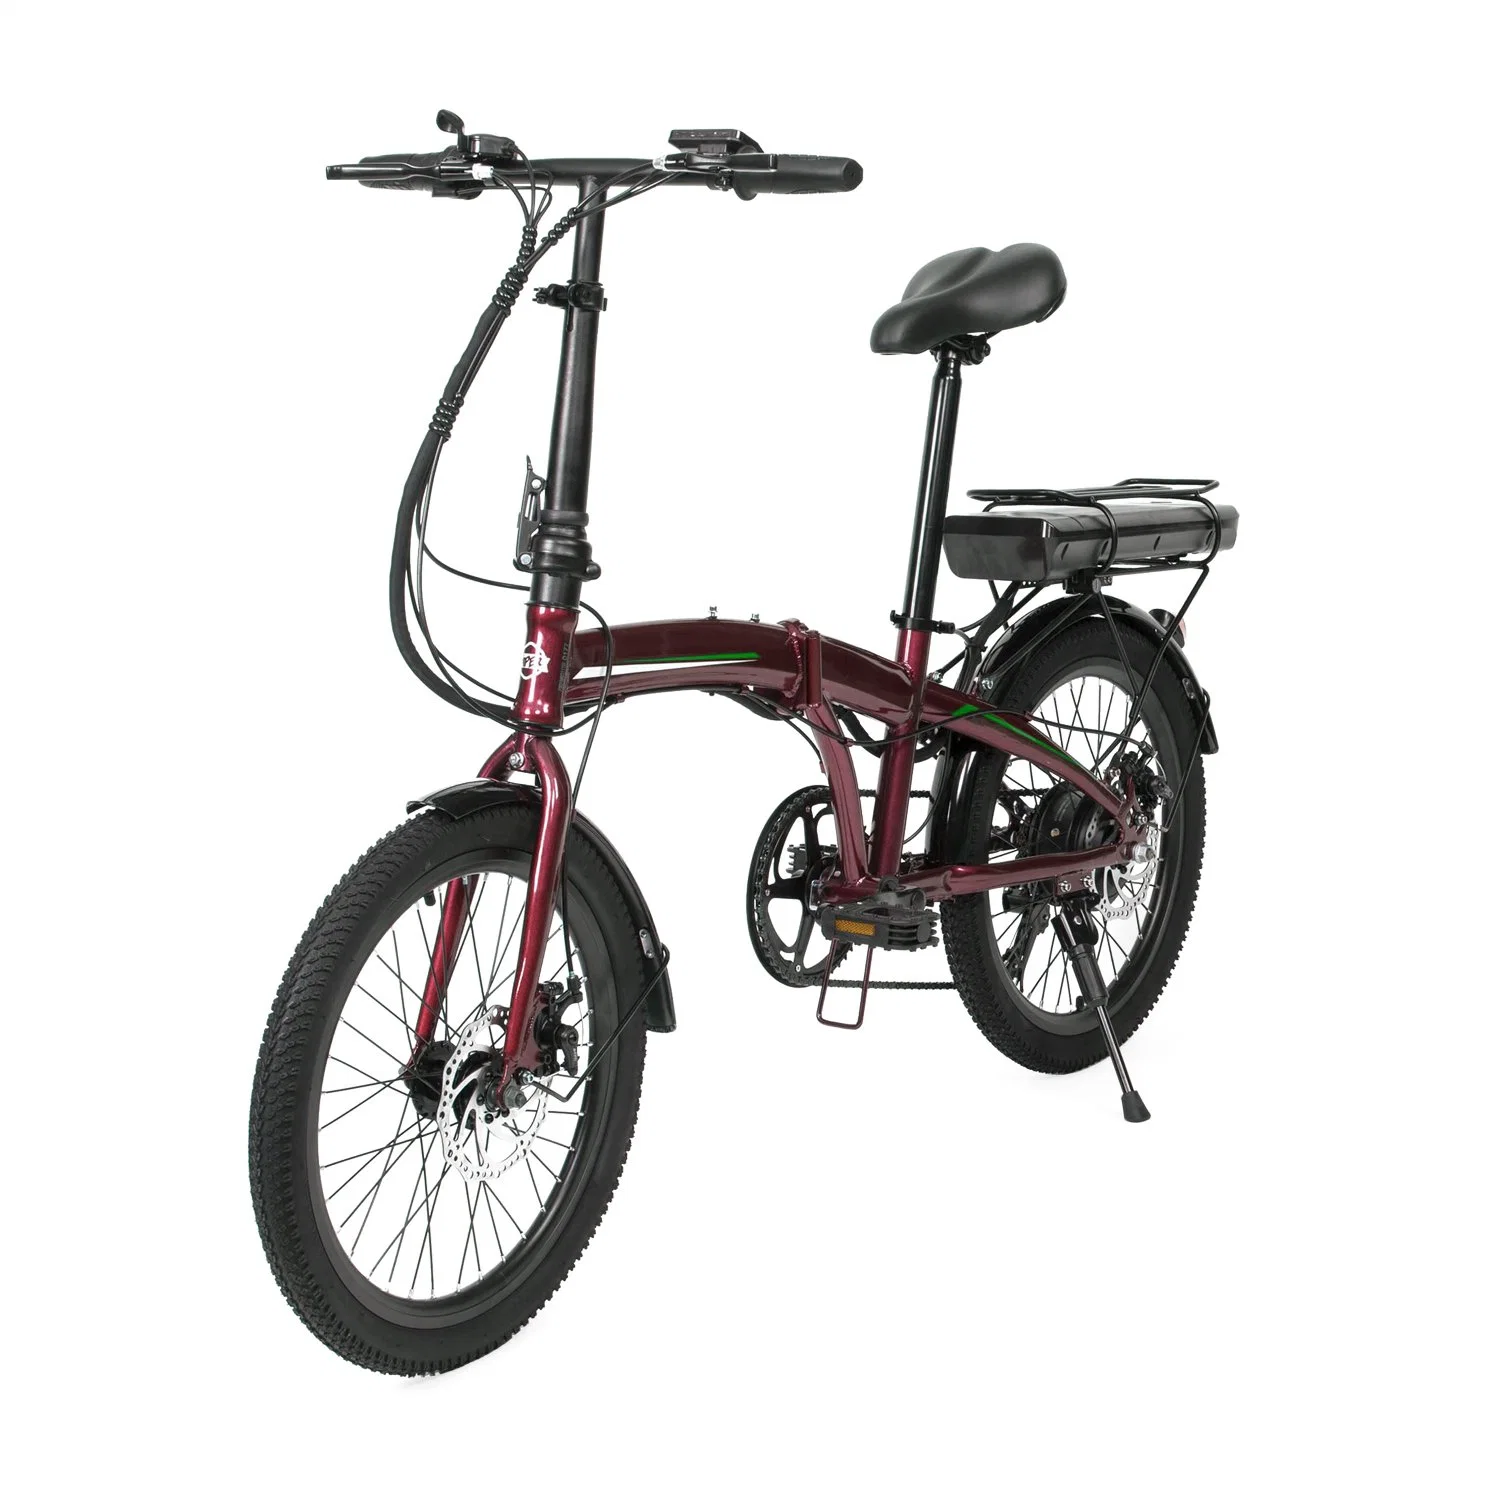 Carbon Steel Frame 60km Full Suspension China Manufacturer Commute Classical City Drive New Design Electric Bike